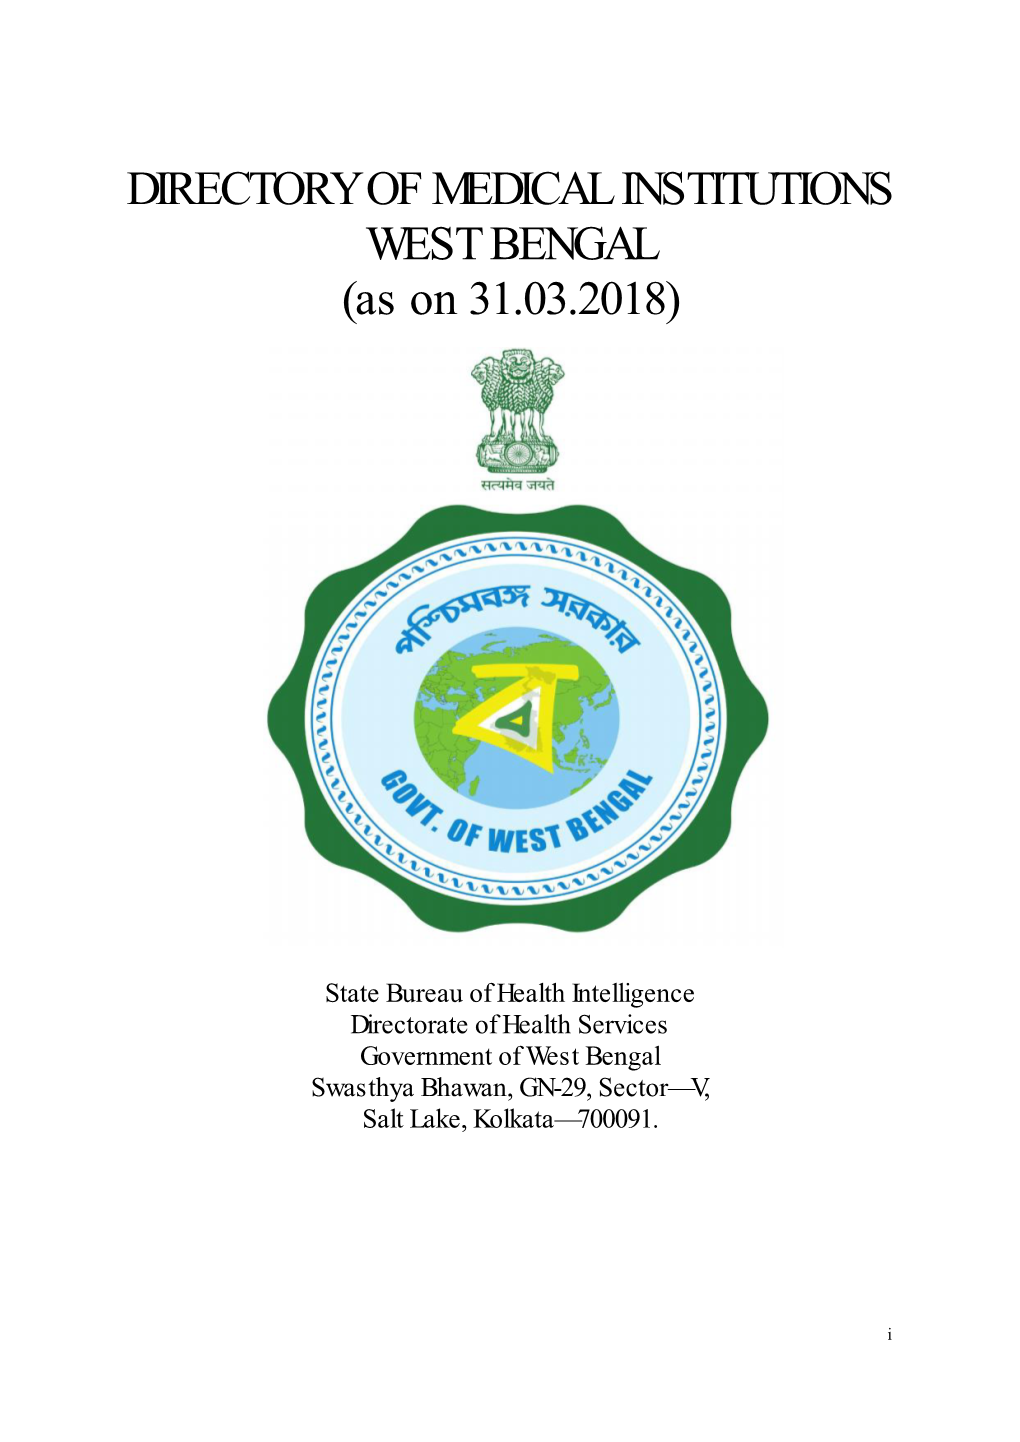 DIRECTORY of MEDICAL INSTITUTIONS WEST BENGAL (As on 31.03.2018)